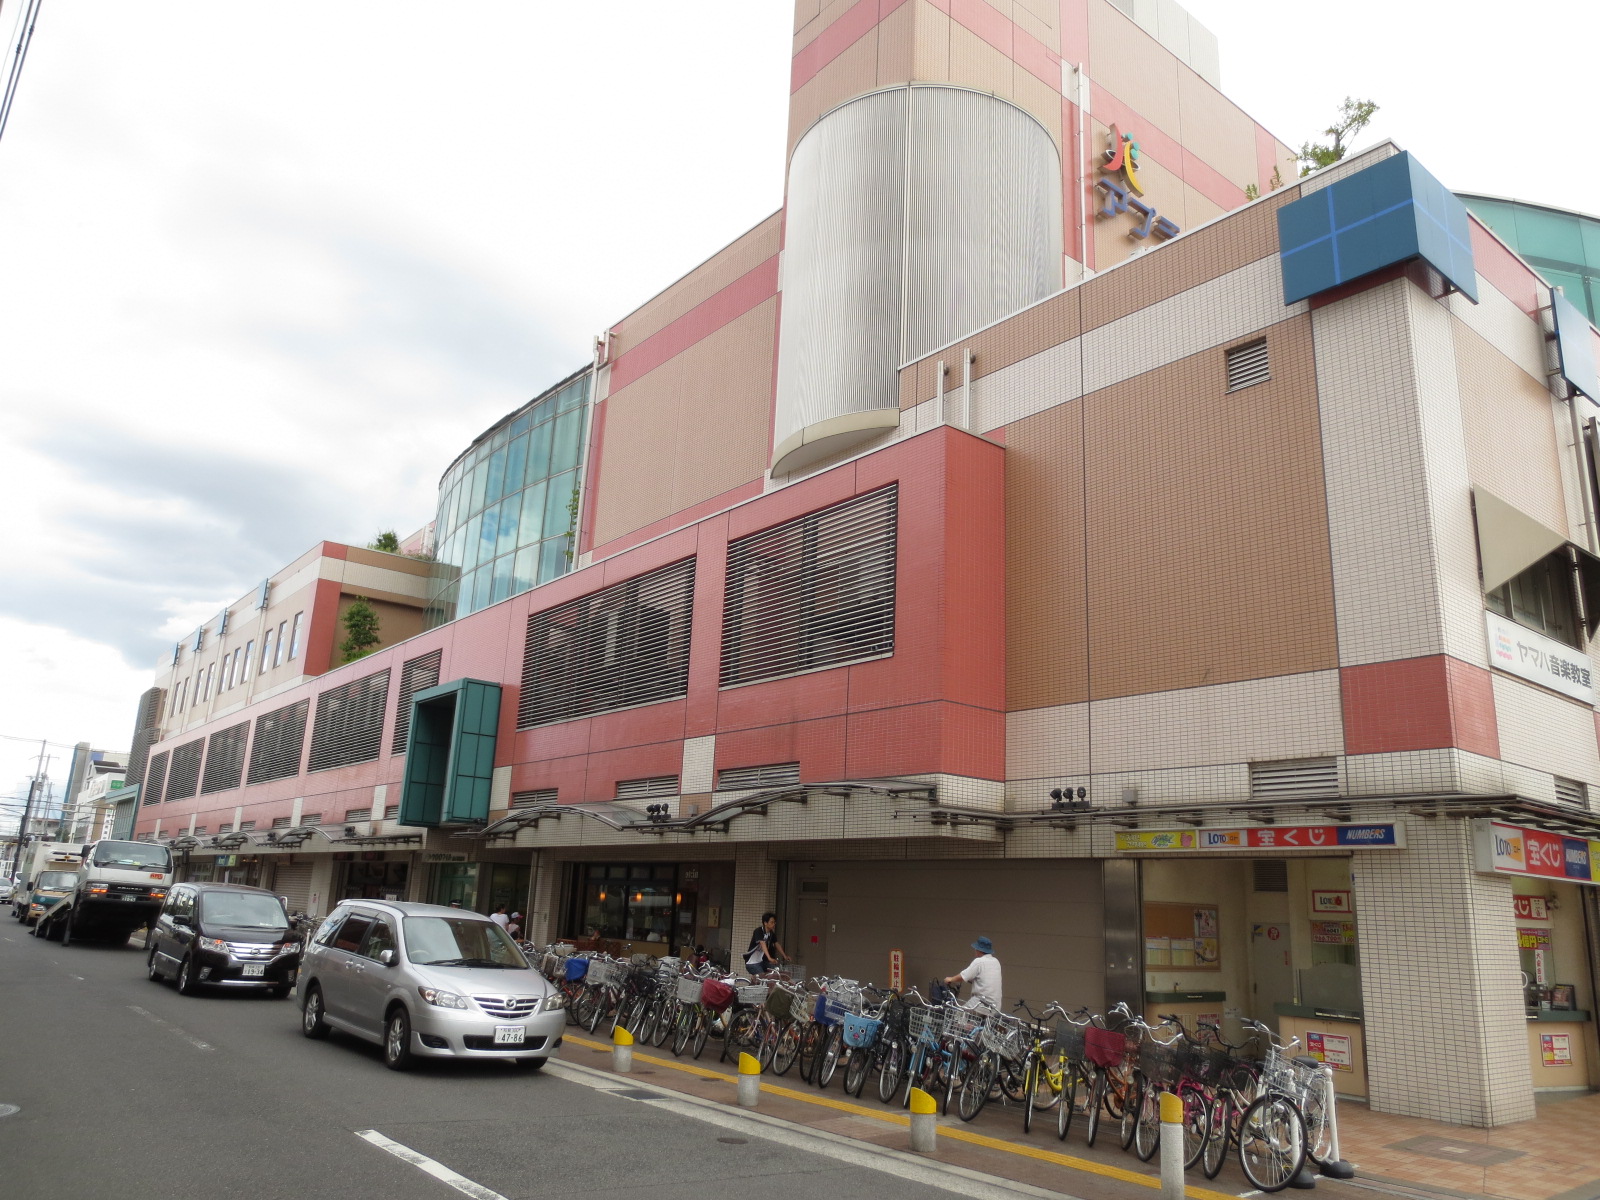 Shopping centre. Apra tall to up to (shopping center) 1500m